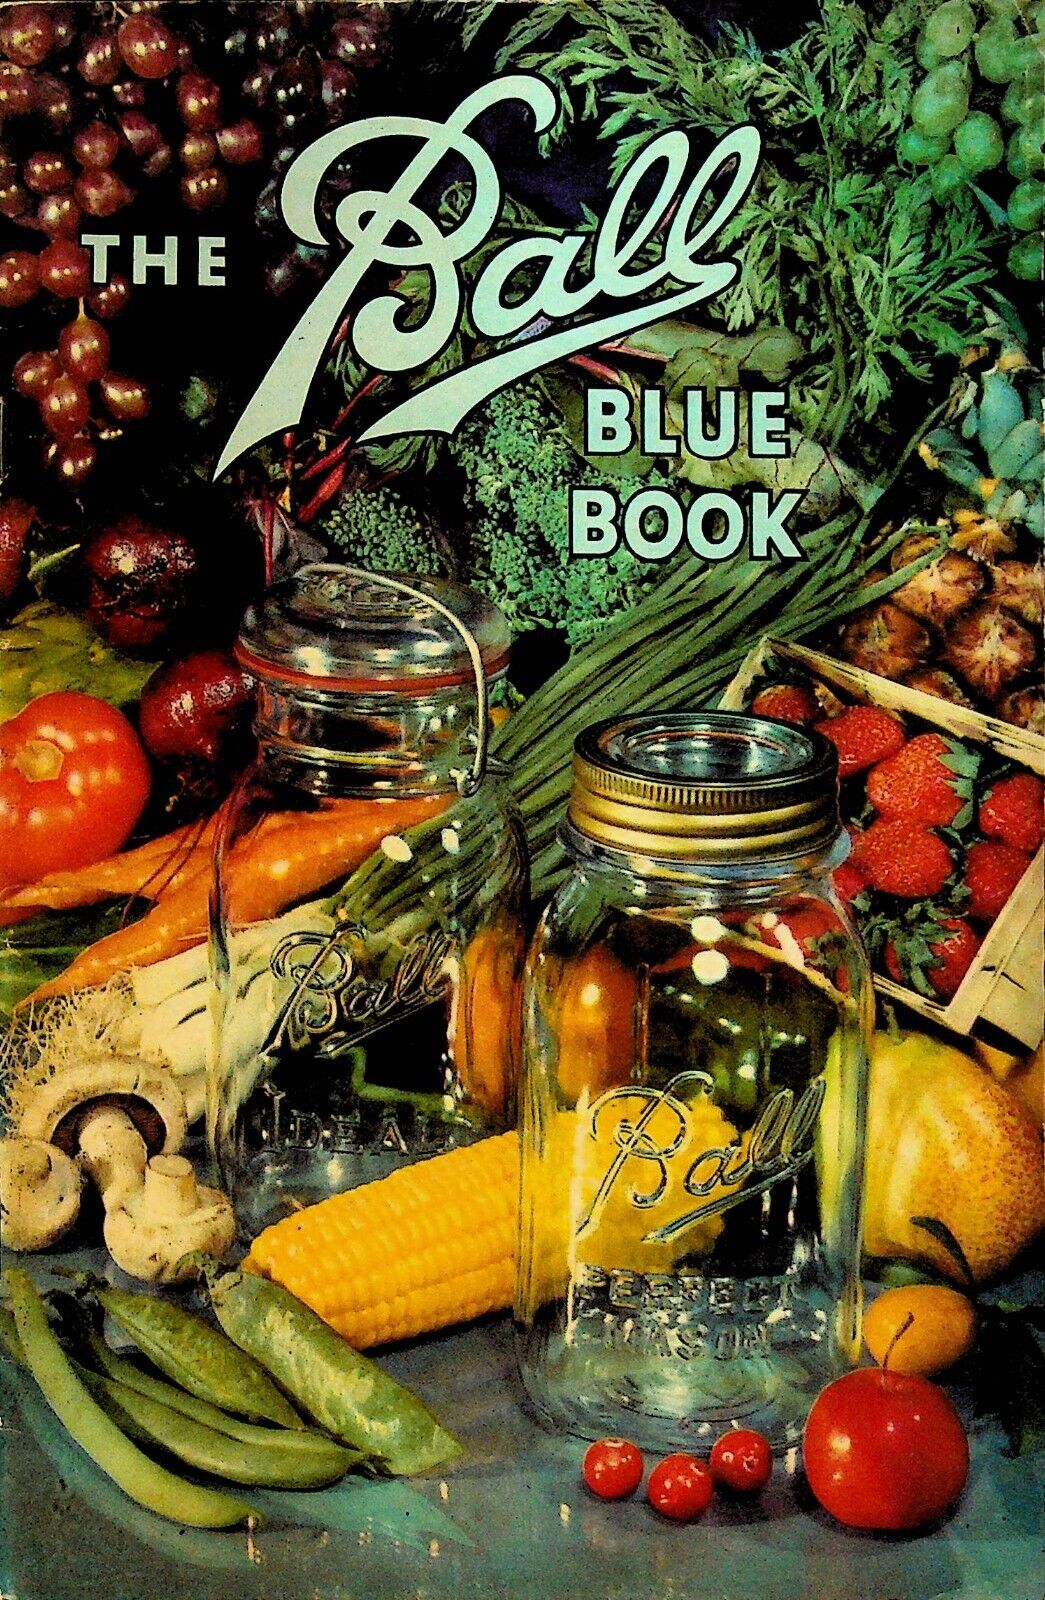 Ball Blue Book Canning & Preserving Recipes Edition V 1943 Muncie Indiana